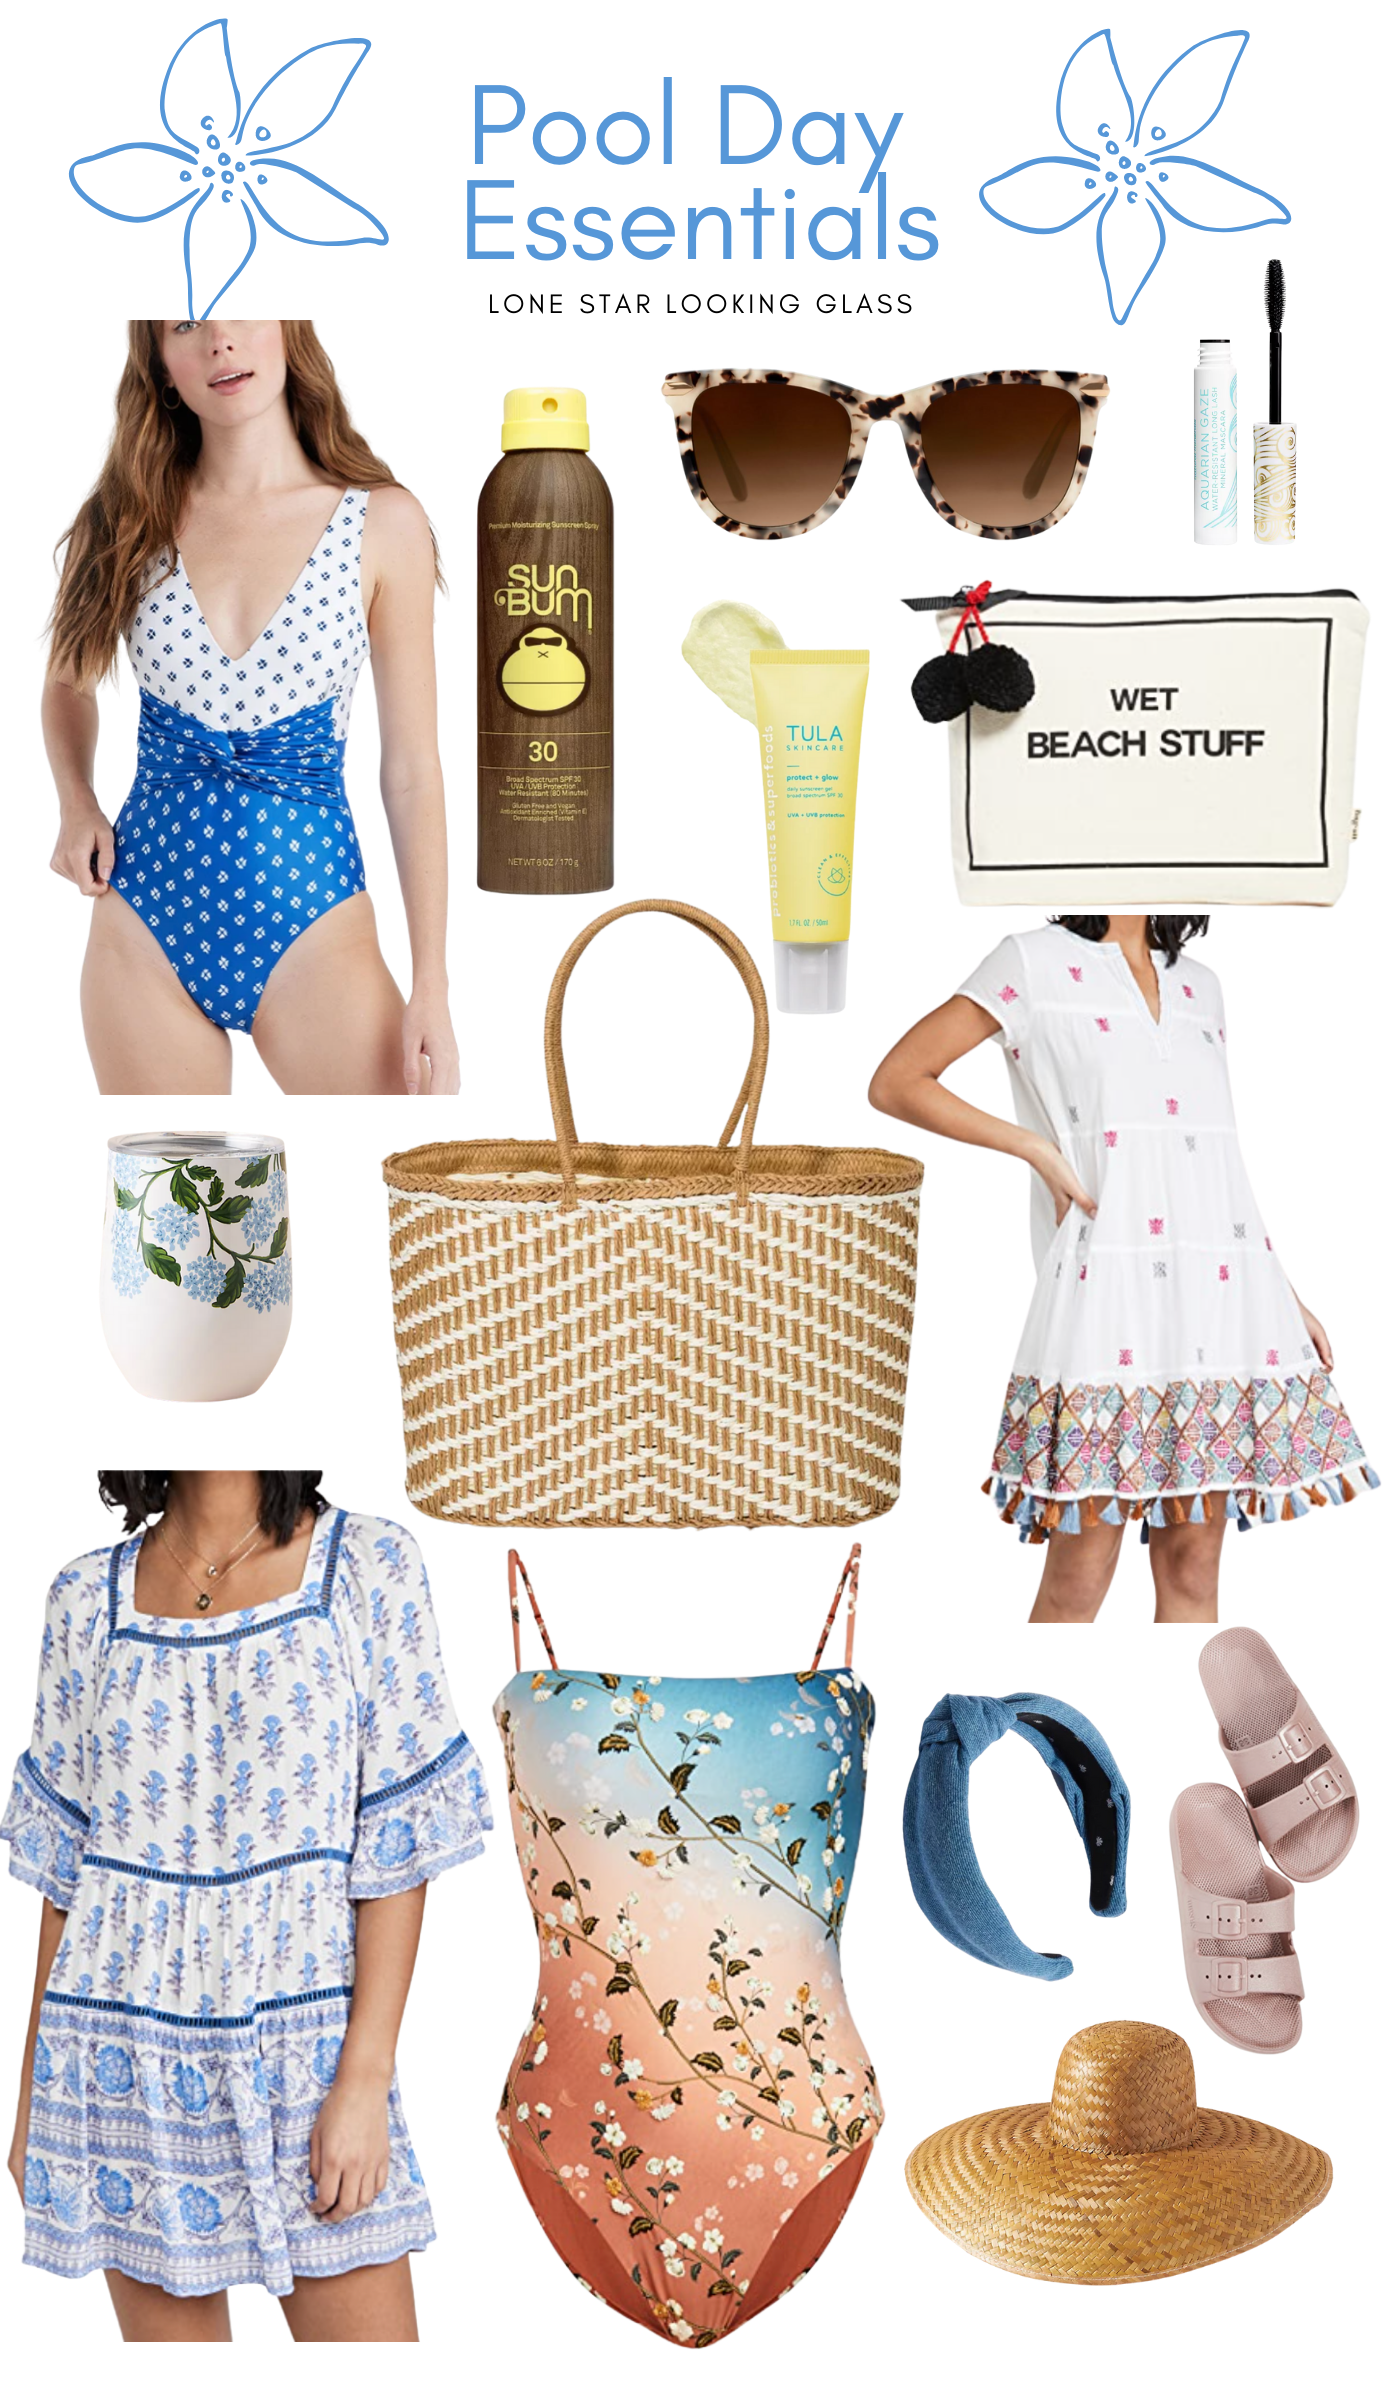 Pool Essentials by popular Memphis life and style blog, Lone Star Looking Glass: collage image of a blue and white polka dot one piece swimsuit, SunBum spray on sun screen, tortoise shell sunglasses, Wet Beach stuff bag, waterproof mascara, blue and orange ombre floral print swimsuit, chambray knot headband, pink Birkenstock sandals, straw sunhat, blue and white coverup dress, white, blue and red geometric print coverup dress, and woven tote bag. 